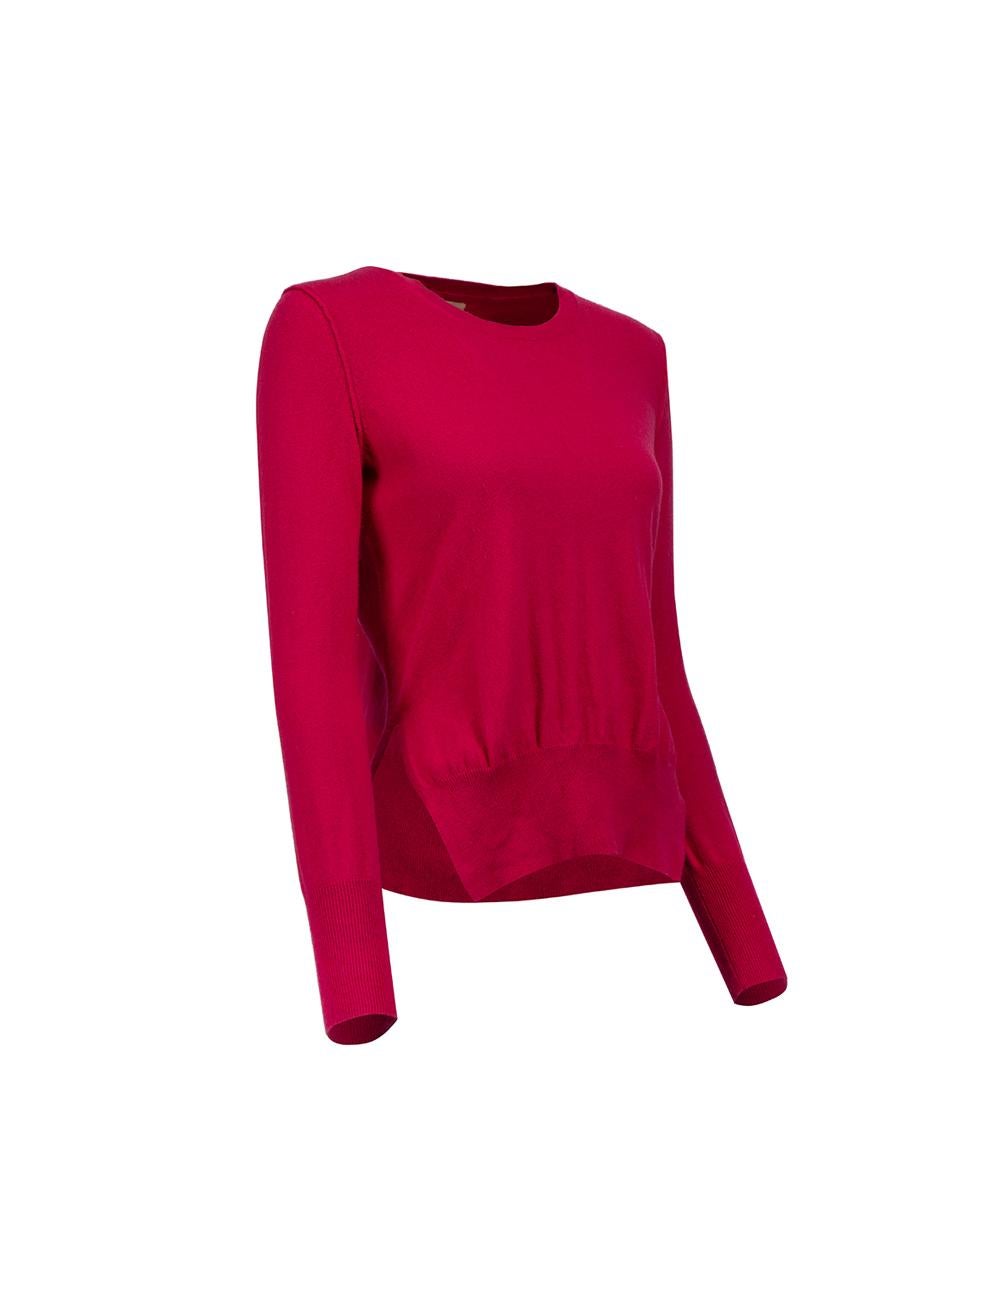 CONDITION is Very good. Minimal wear to jumper is evident. Minimal wear to the knit with textured pilling on this used Isabel Marant Étoile designer resale item.



Details


Pink

Cotton

Knitted sweater

Round neckline

Long sleeved

Ribbed cuffs